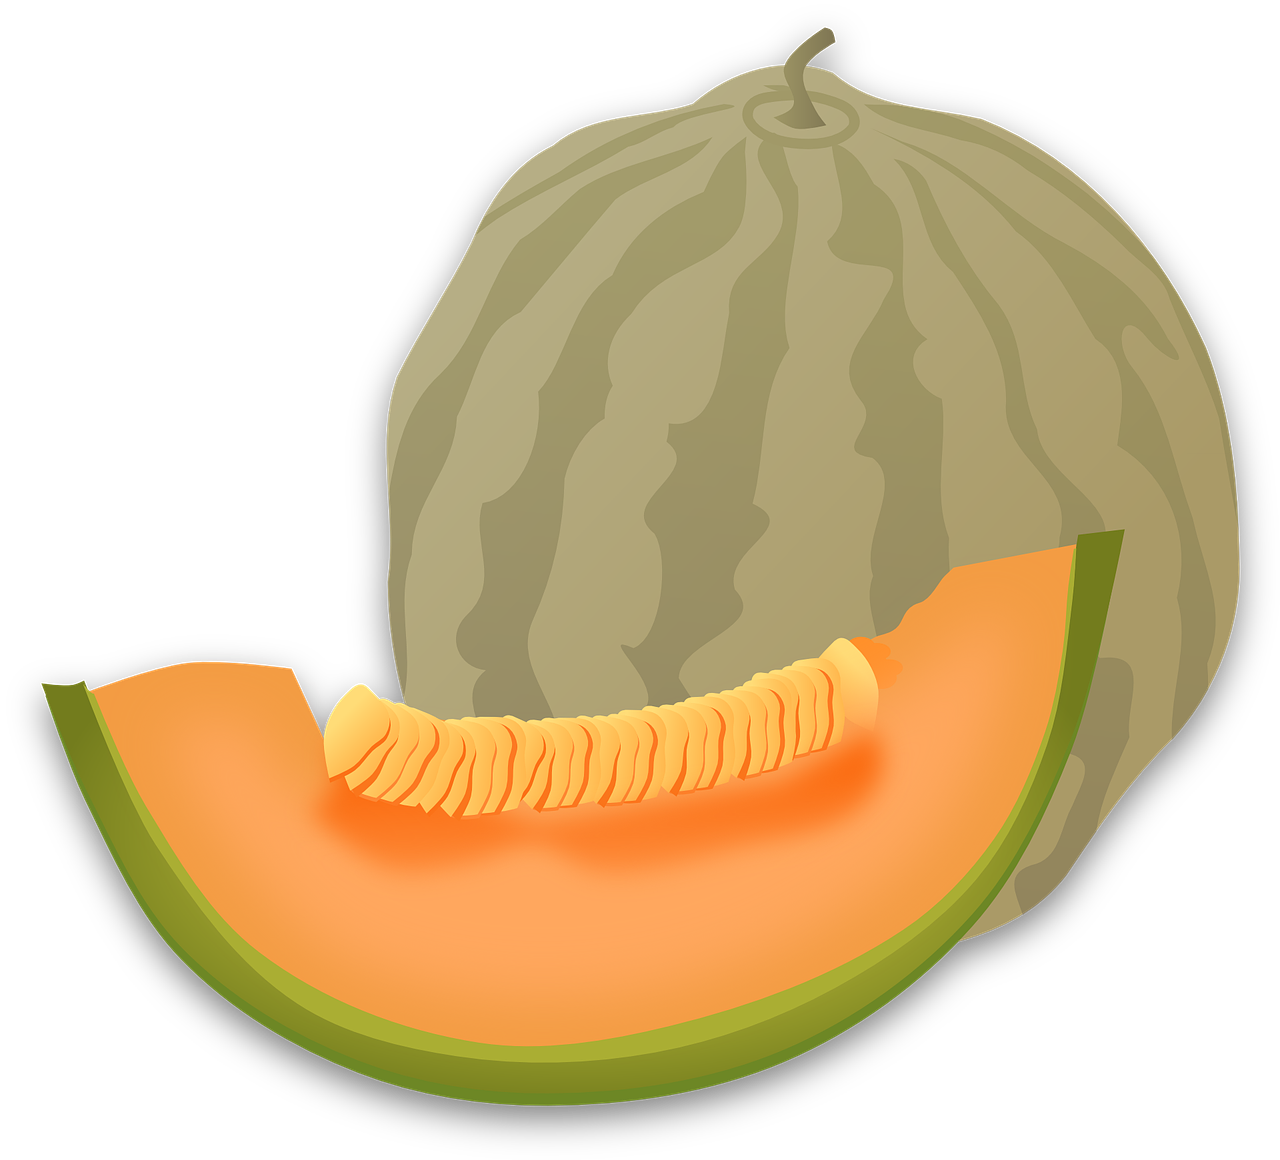 Download PNG image - Cantaloupe Slices PNG Clipart 